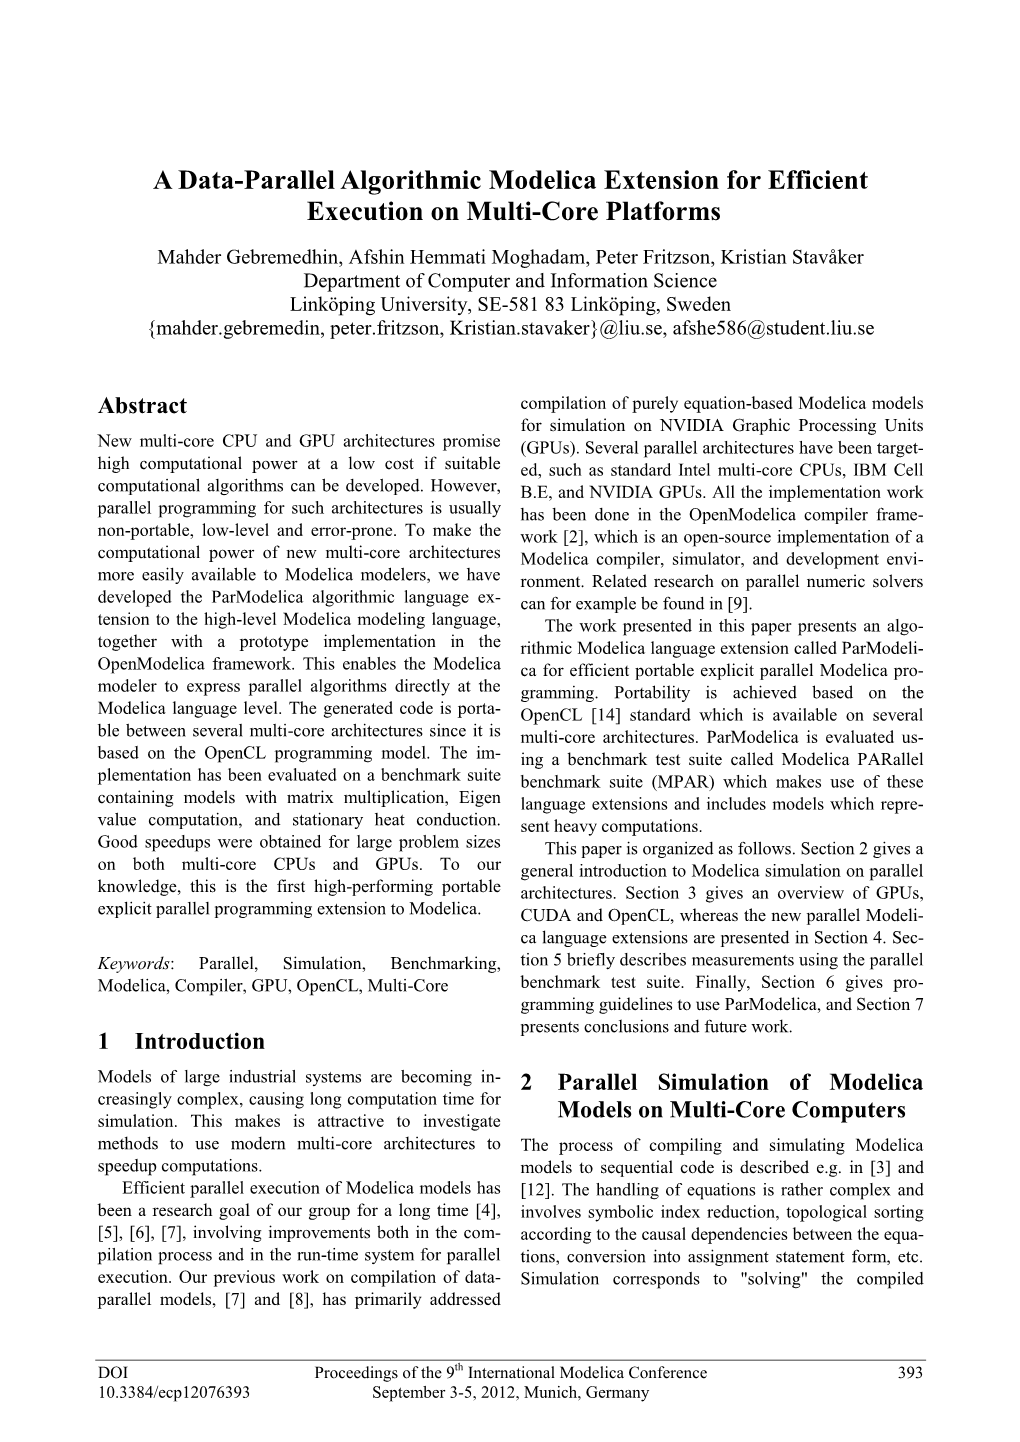 A Data-Parallel Algorithmic Modelica Extension for Efficient Execution on Multi-Core Platforms